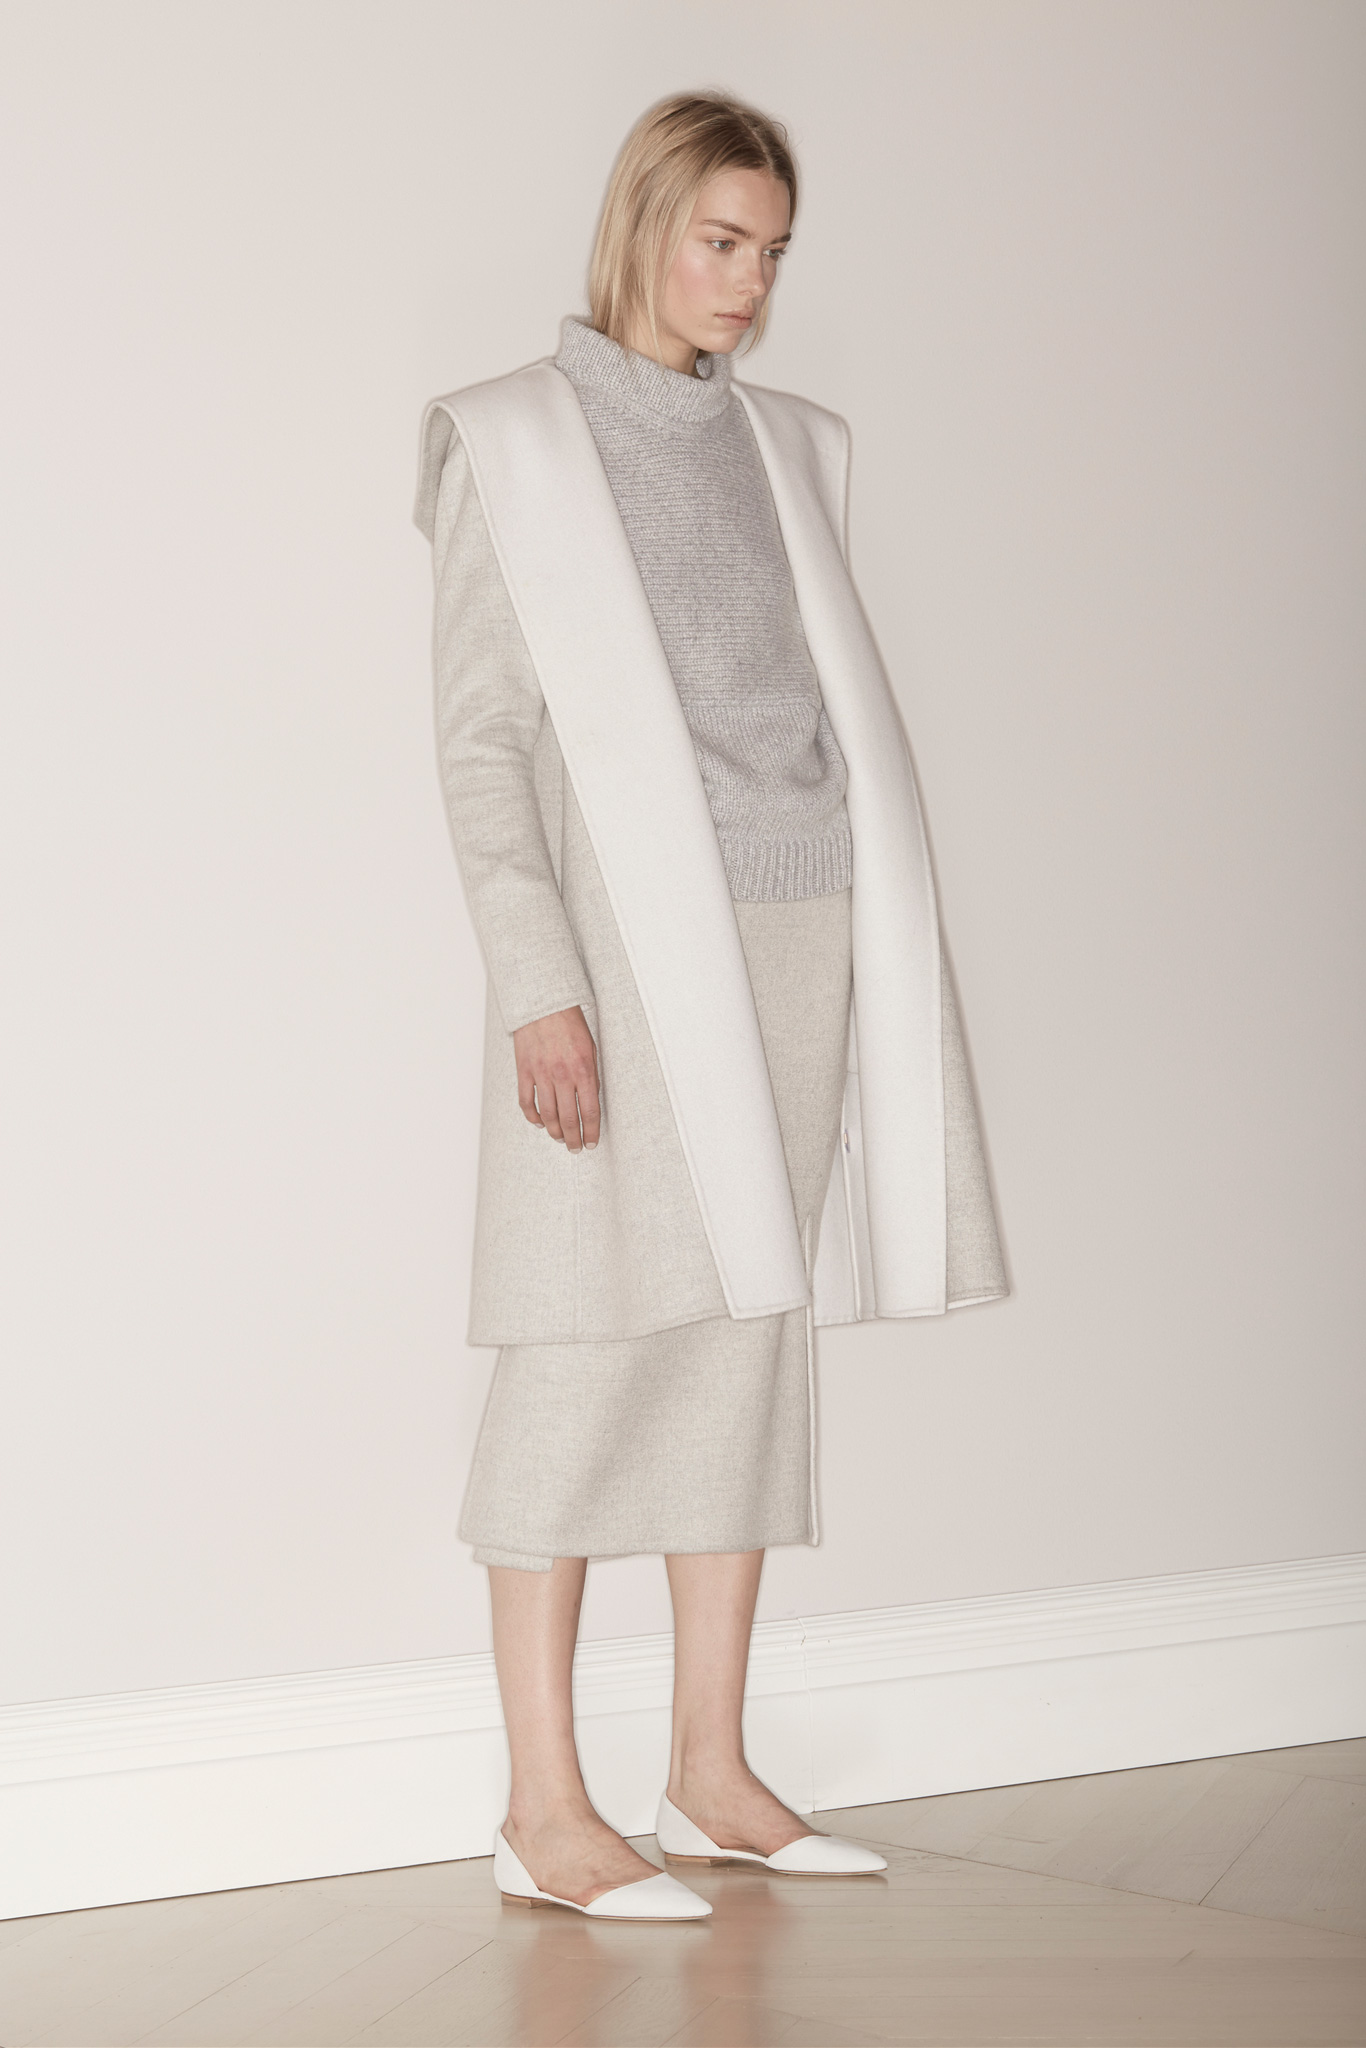 BROCK COLLECTION AUTUMN/WINTER 2015-16 READY-TO-WEAR NEW YORK